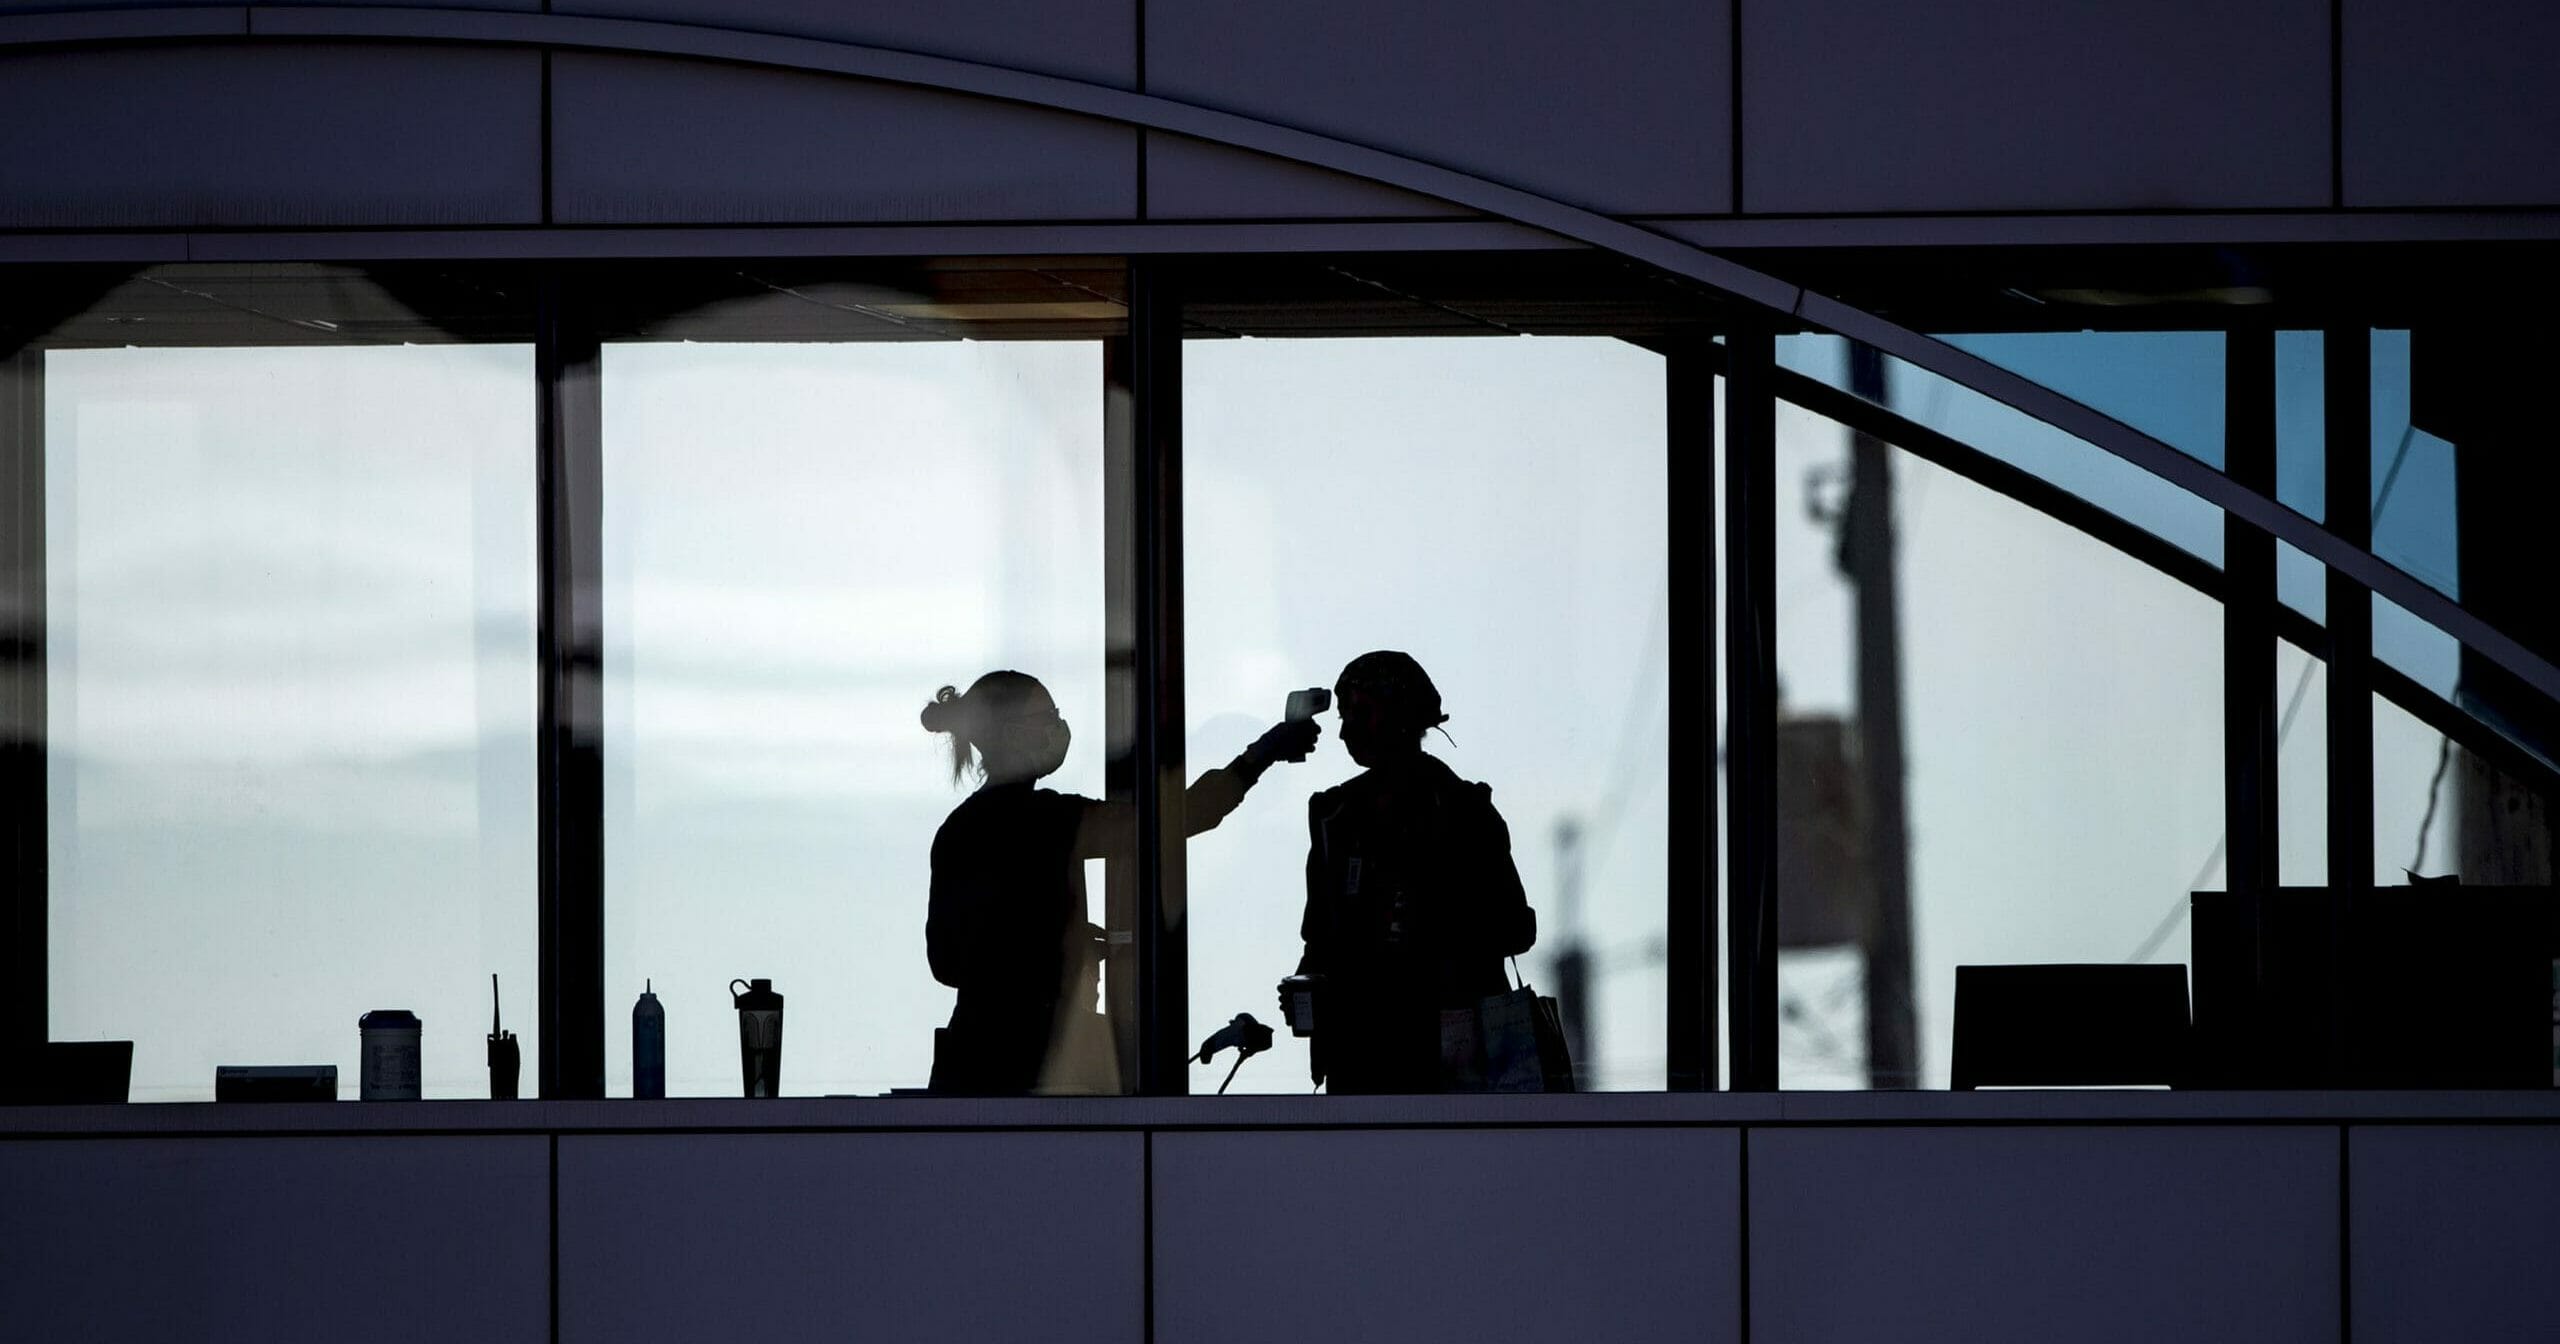 Amid coronavirus concerns, a health care worker takes the temperature of a visitor to Essentia Health in Duluth, Minnesota, who was crossing over a skywalk bridge from the adjoining parking deck April 10, 2020.